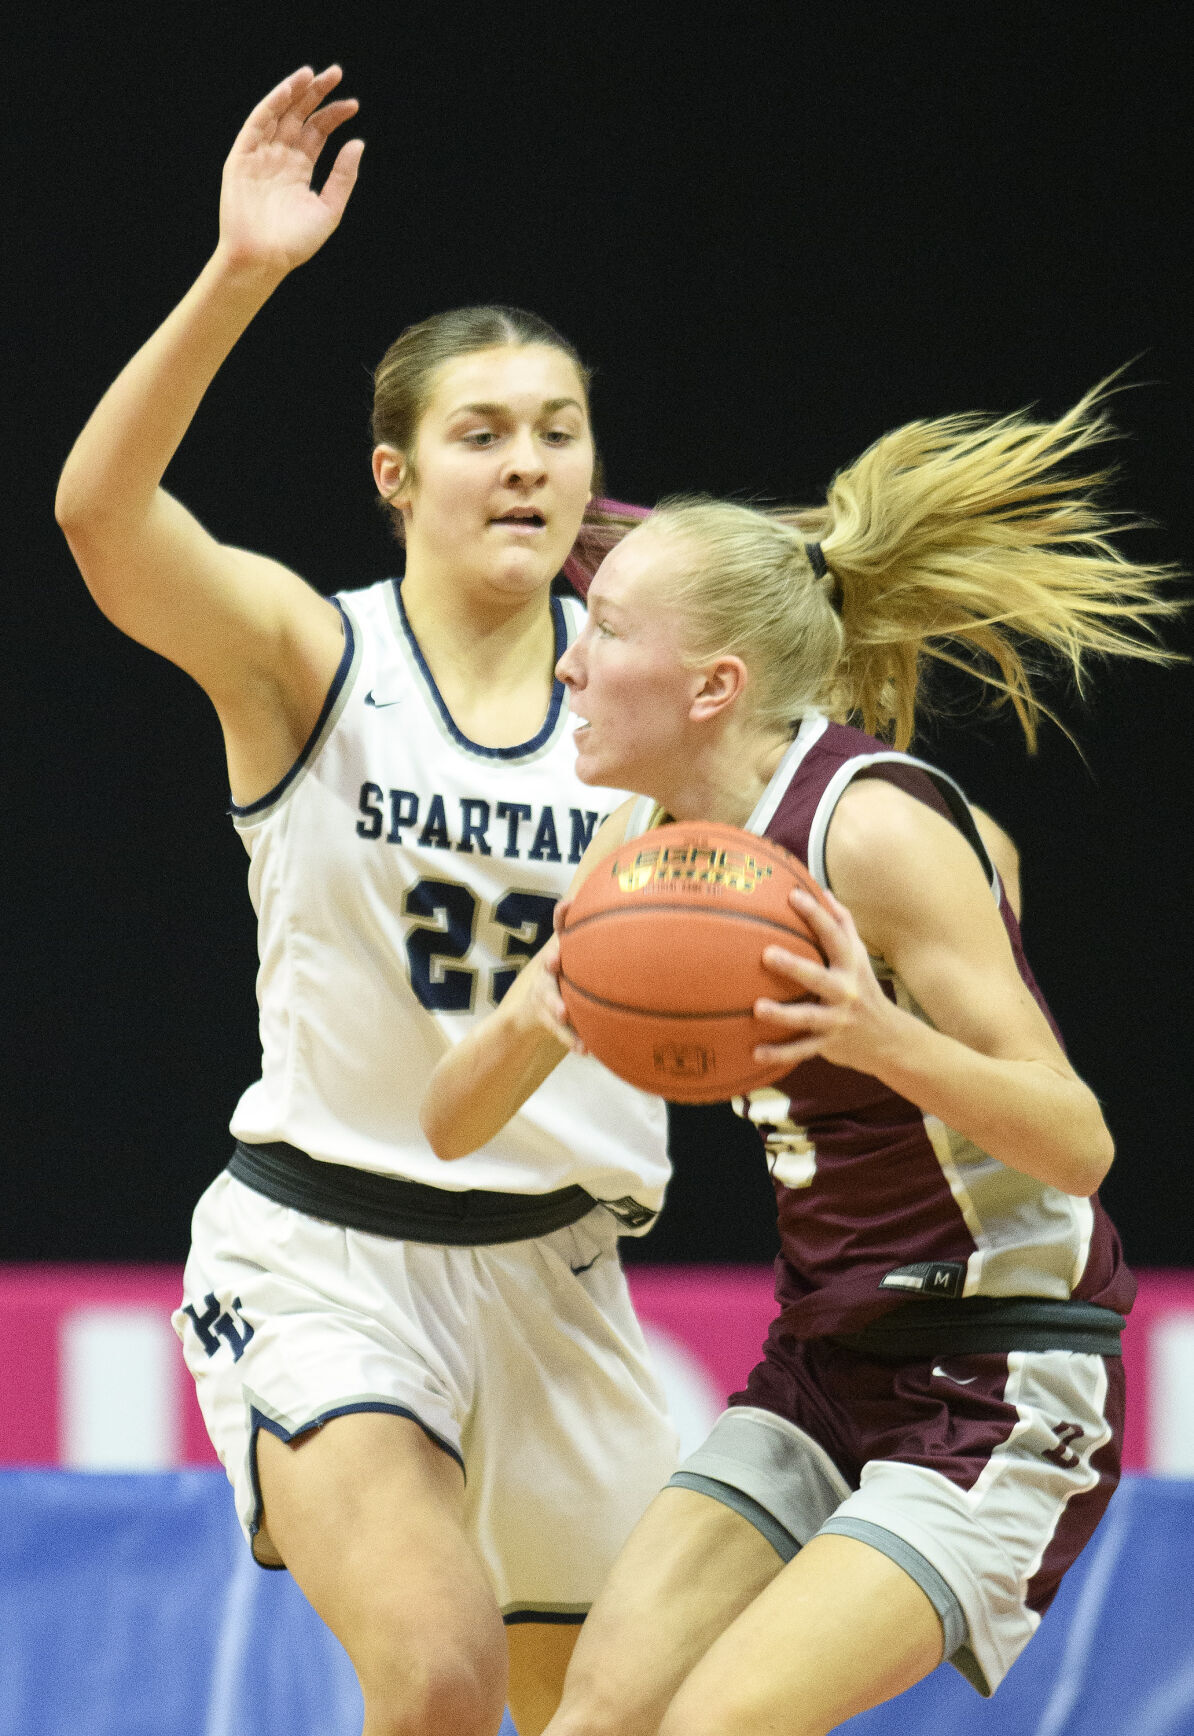 Pleasant Valley muscles past Dowling in 5A girls semifinals, 50-33